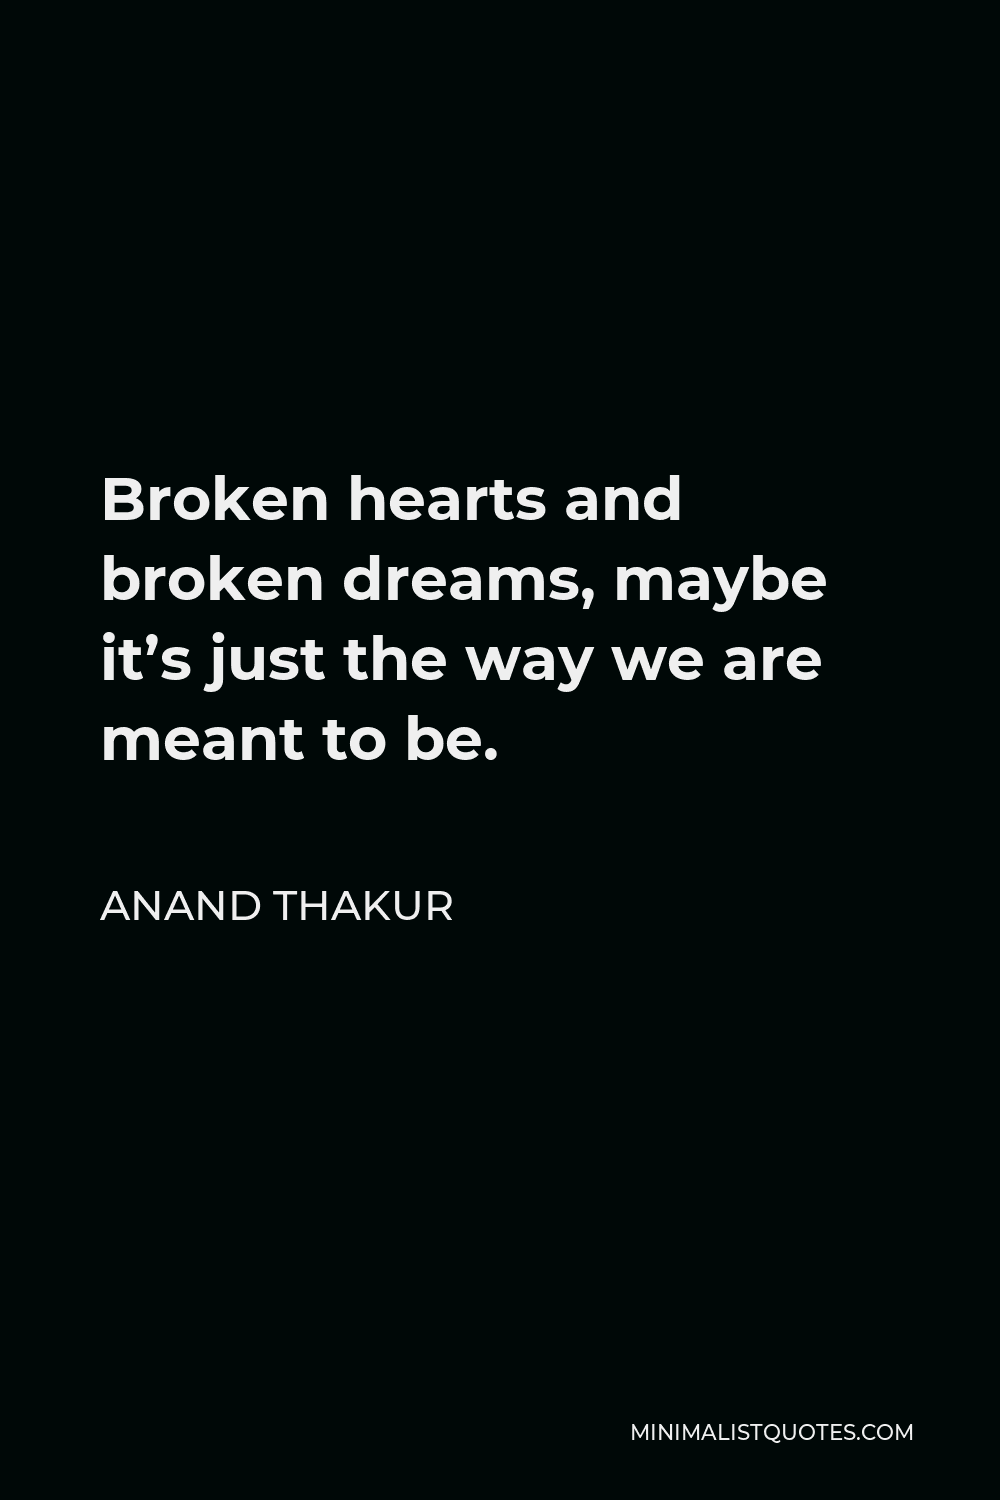 Anand Thakur Quote - Broken hearts and broken dreams, maybe it’s just the way we are meant to be.